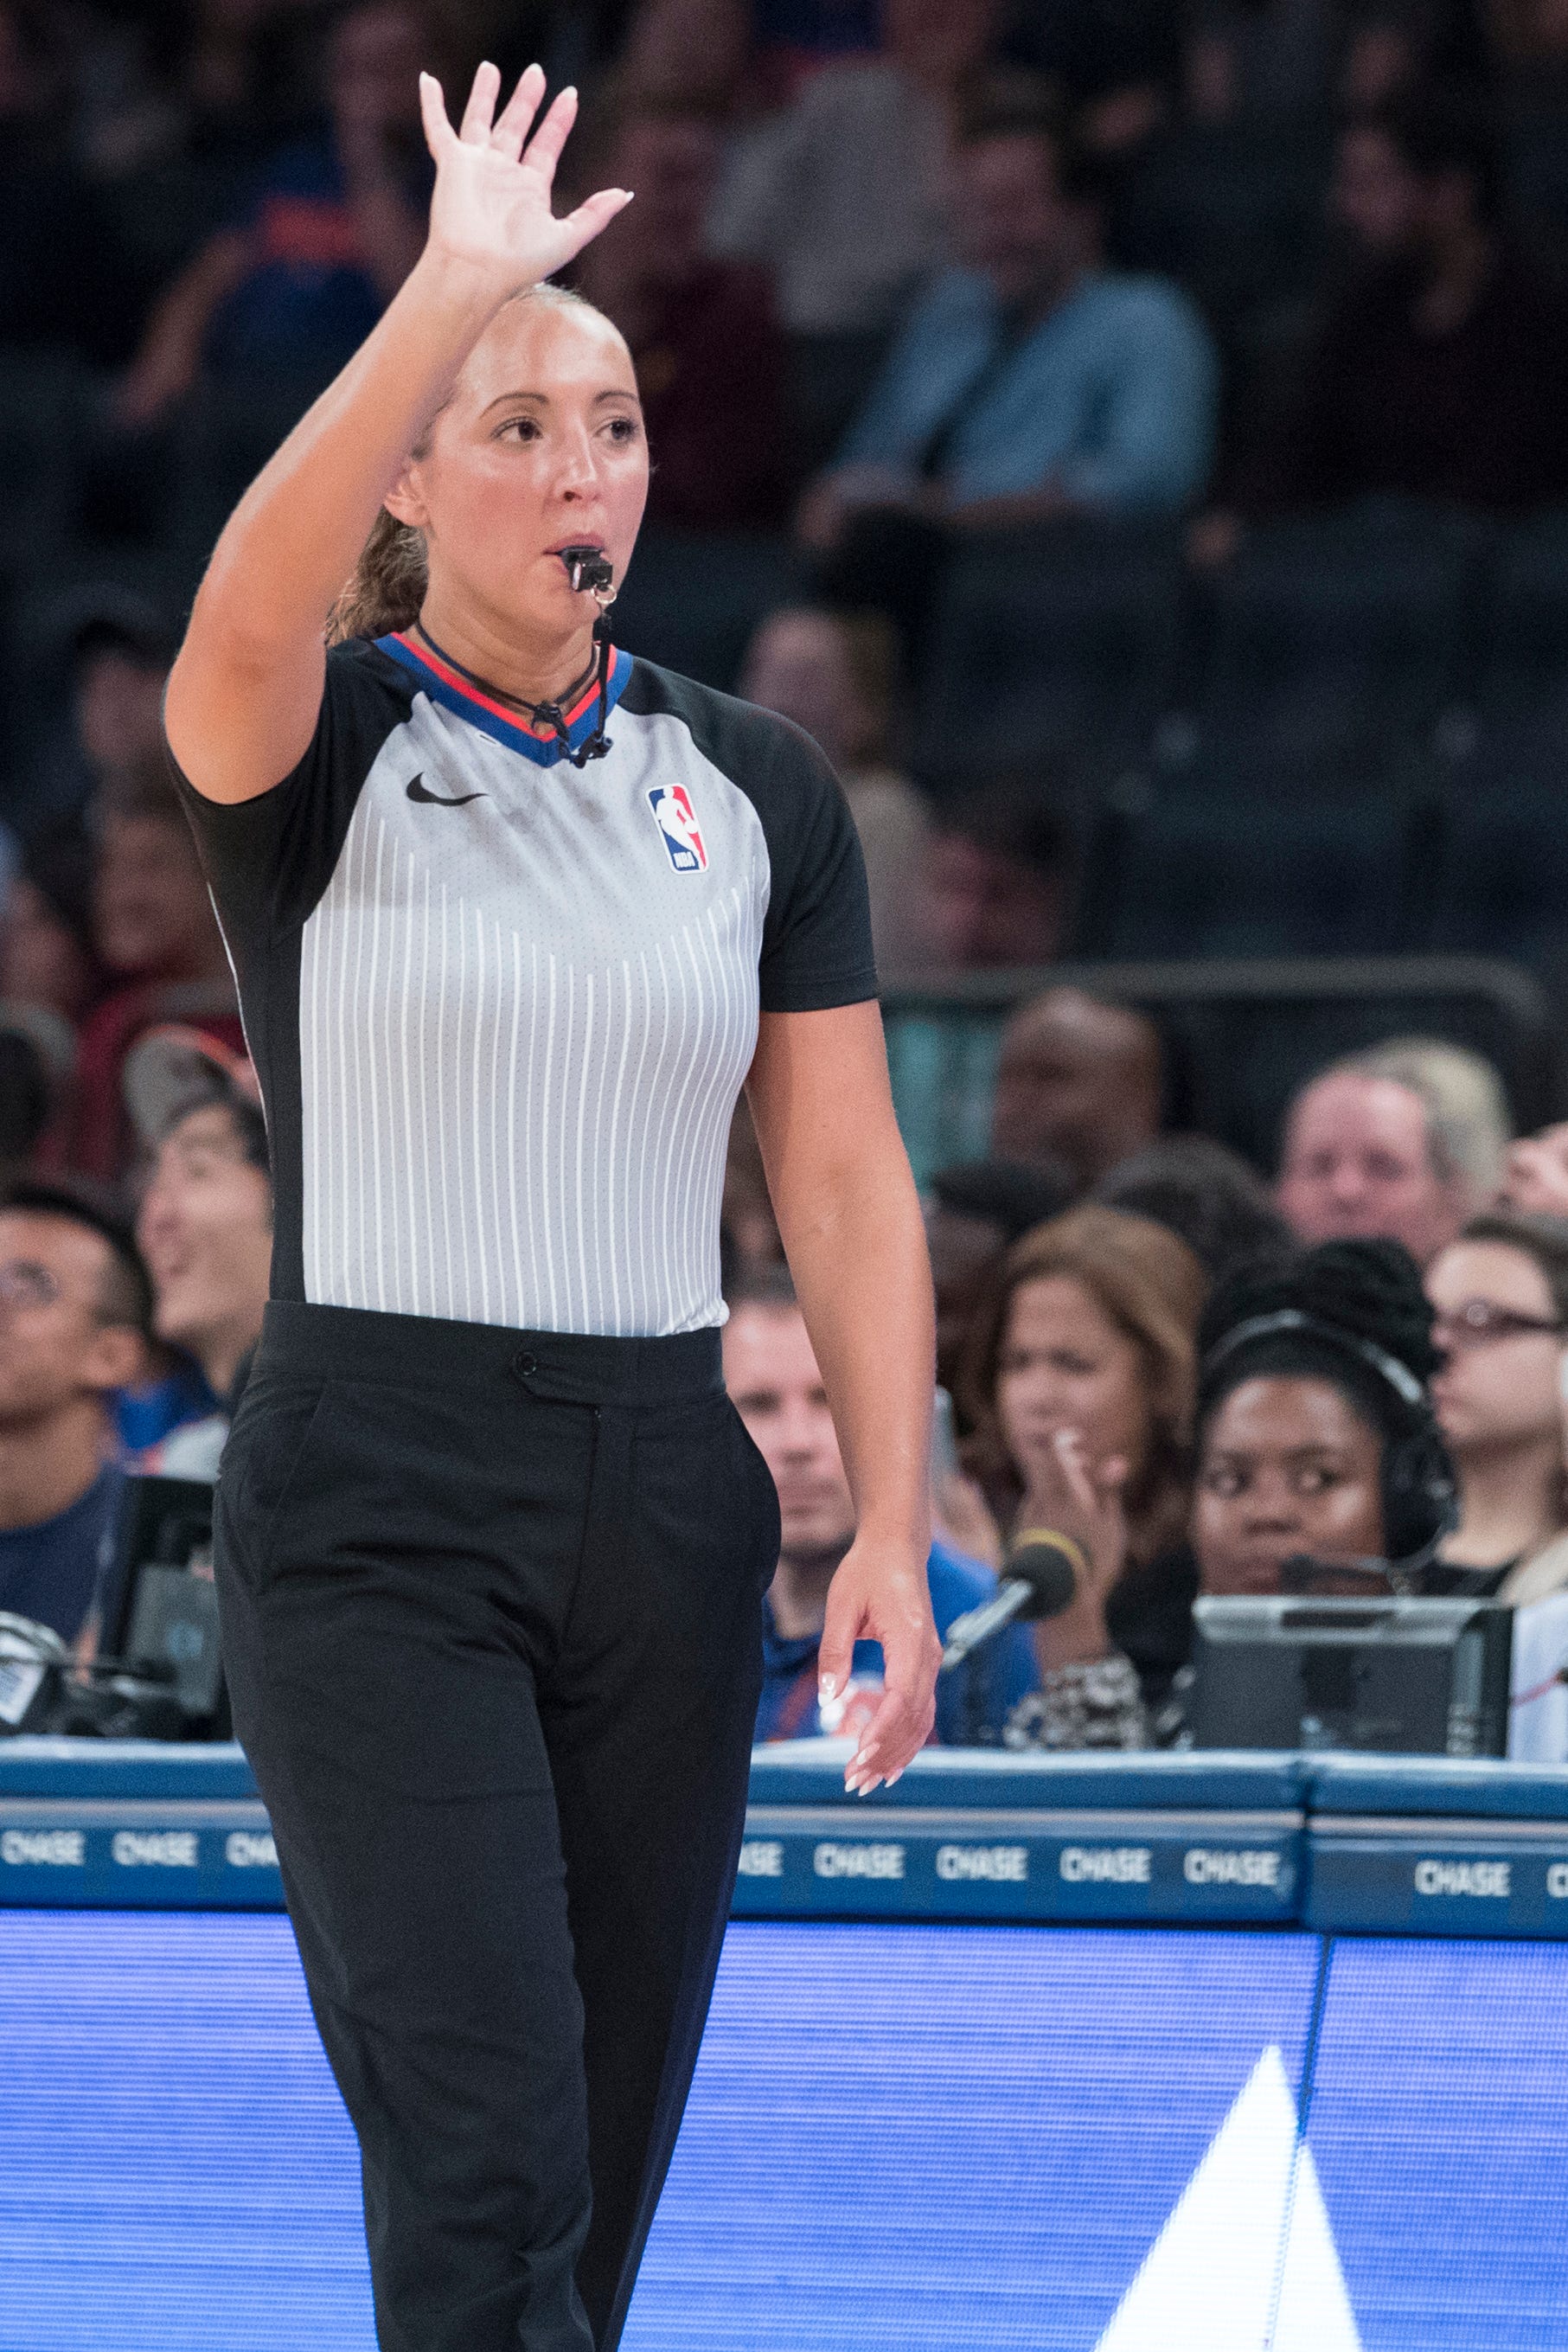 Ashley Moyer-Gleich, a 2006 Cedar Crest grad, was promoted to full-time status as an NBA official on Thursday.